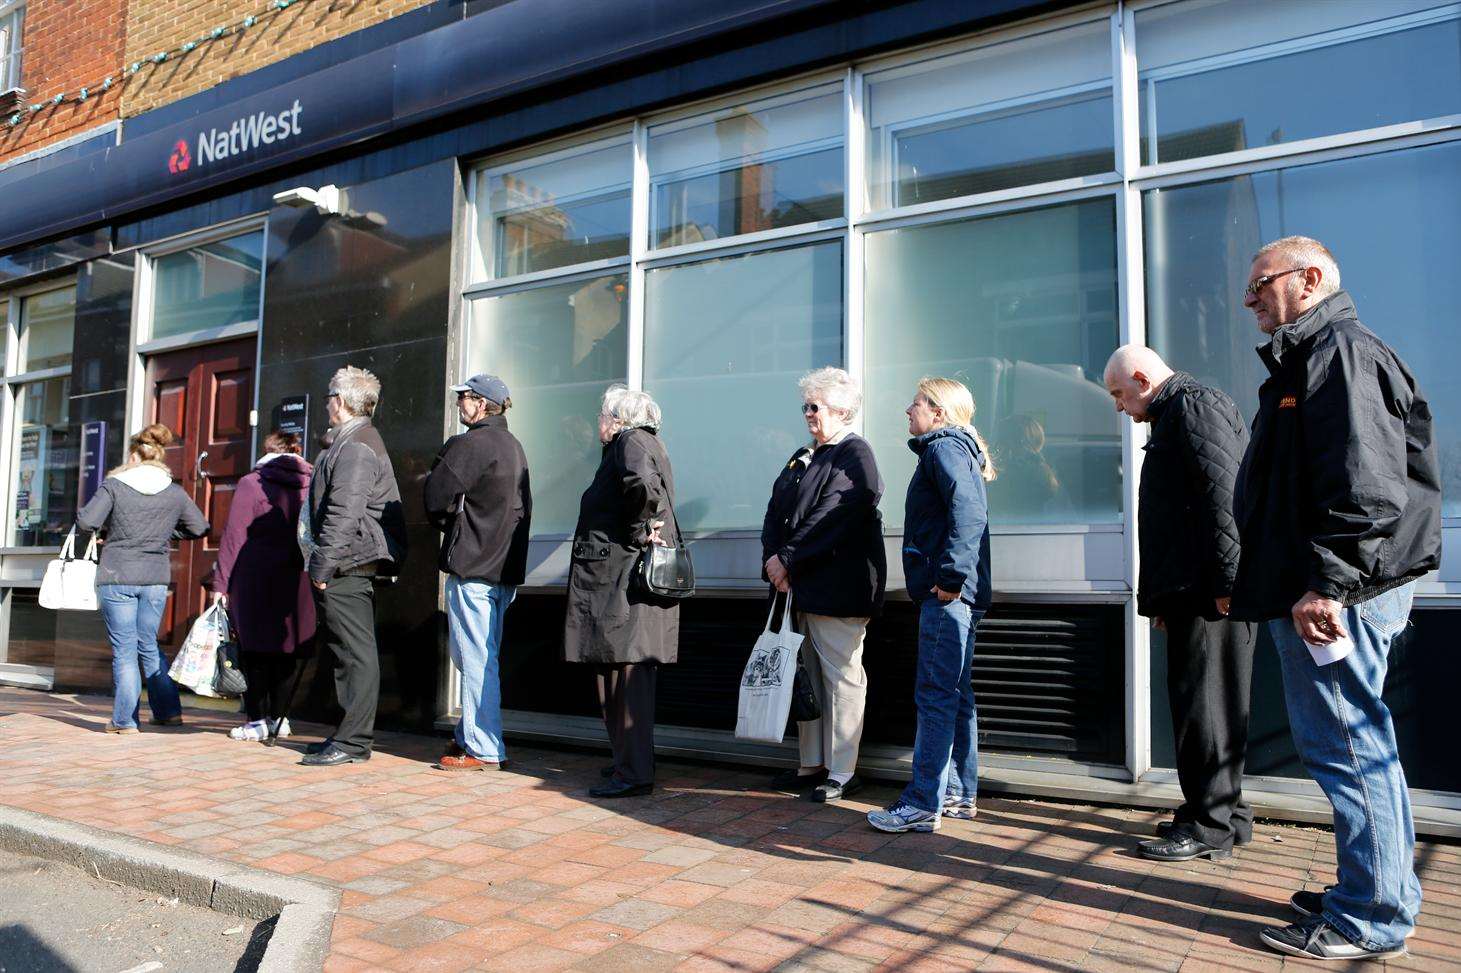 Queuing customers outside NatWest Bank in Snodland which will close in January